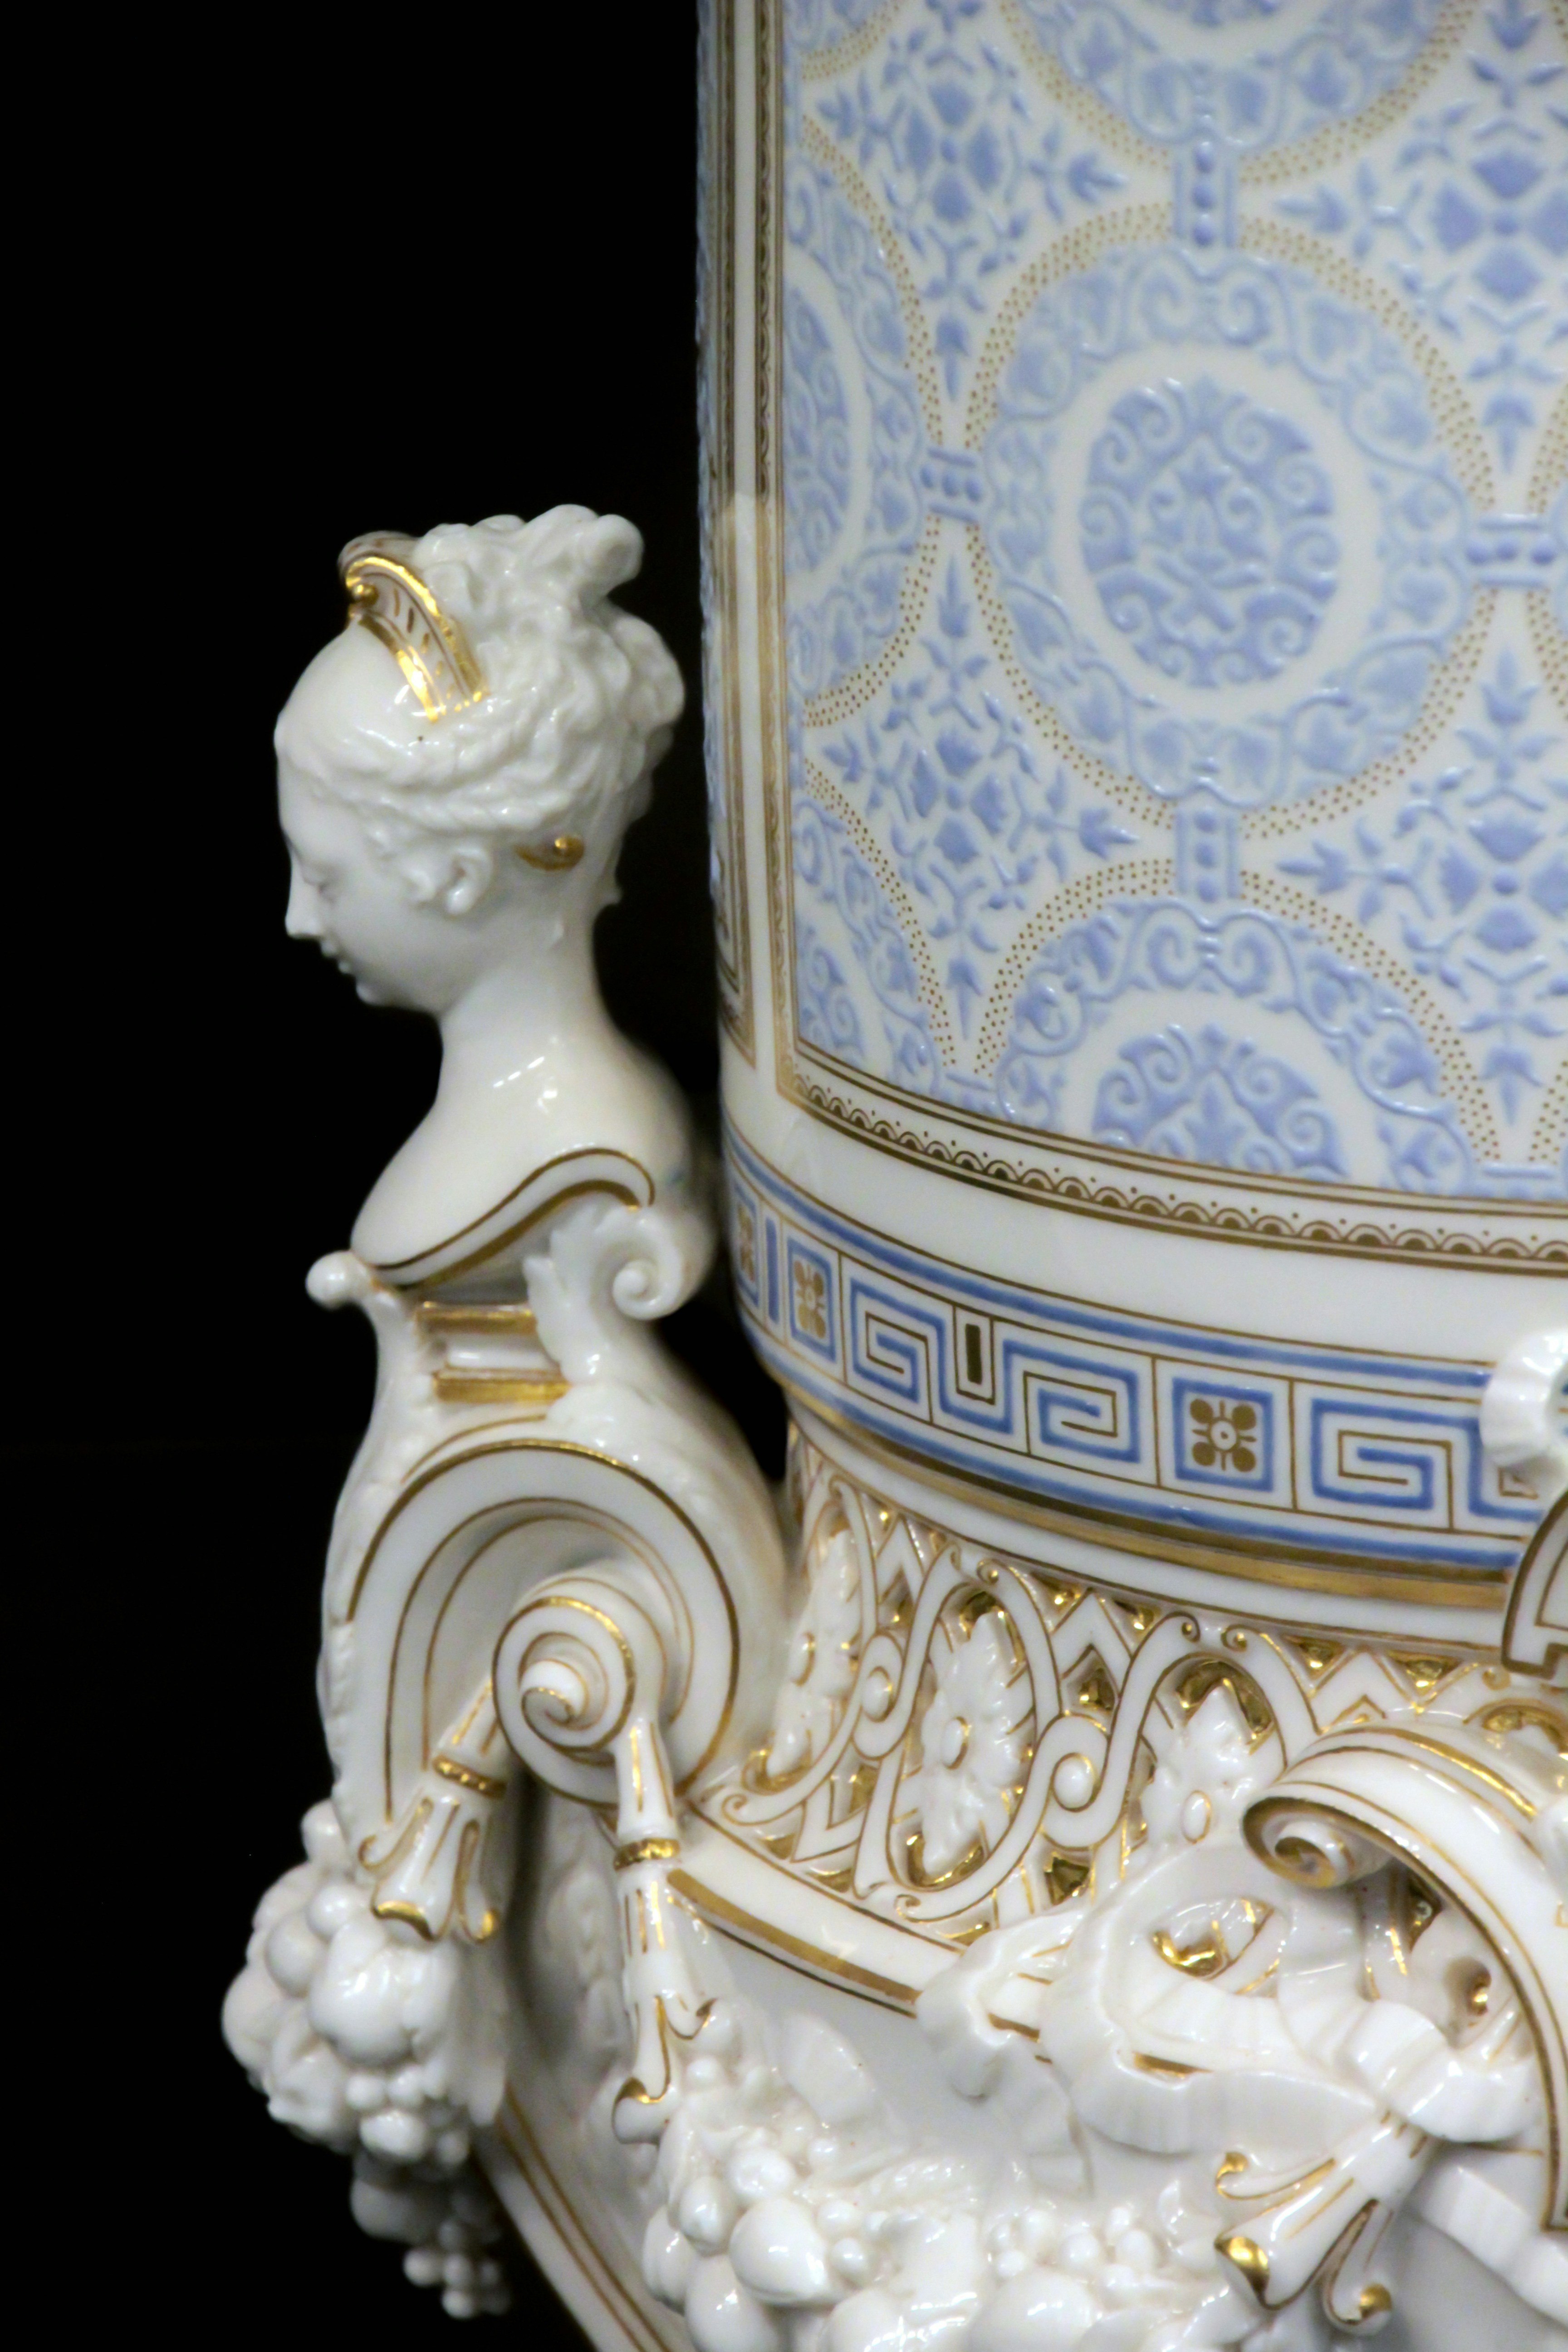 Amazing french vase with gold and beautiful details